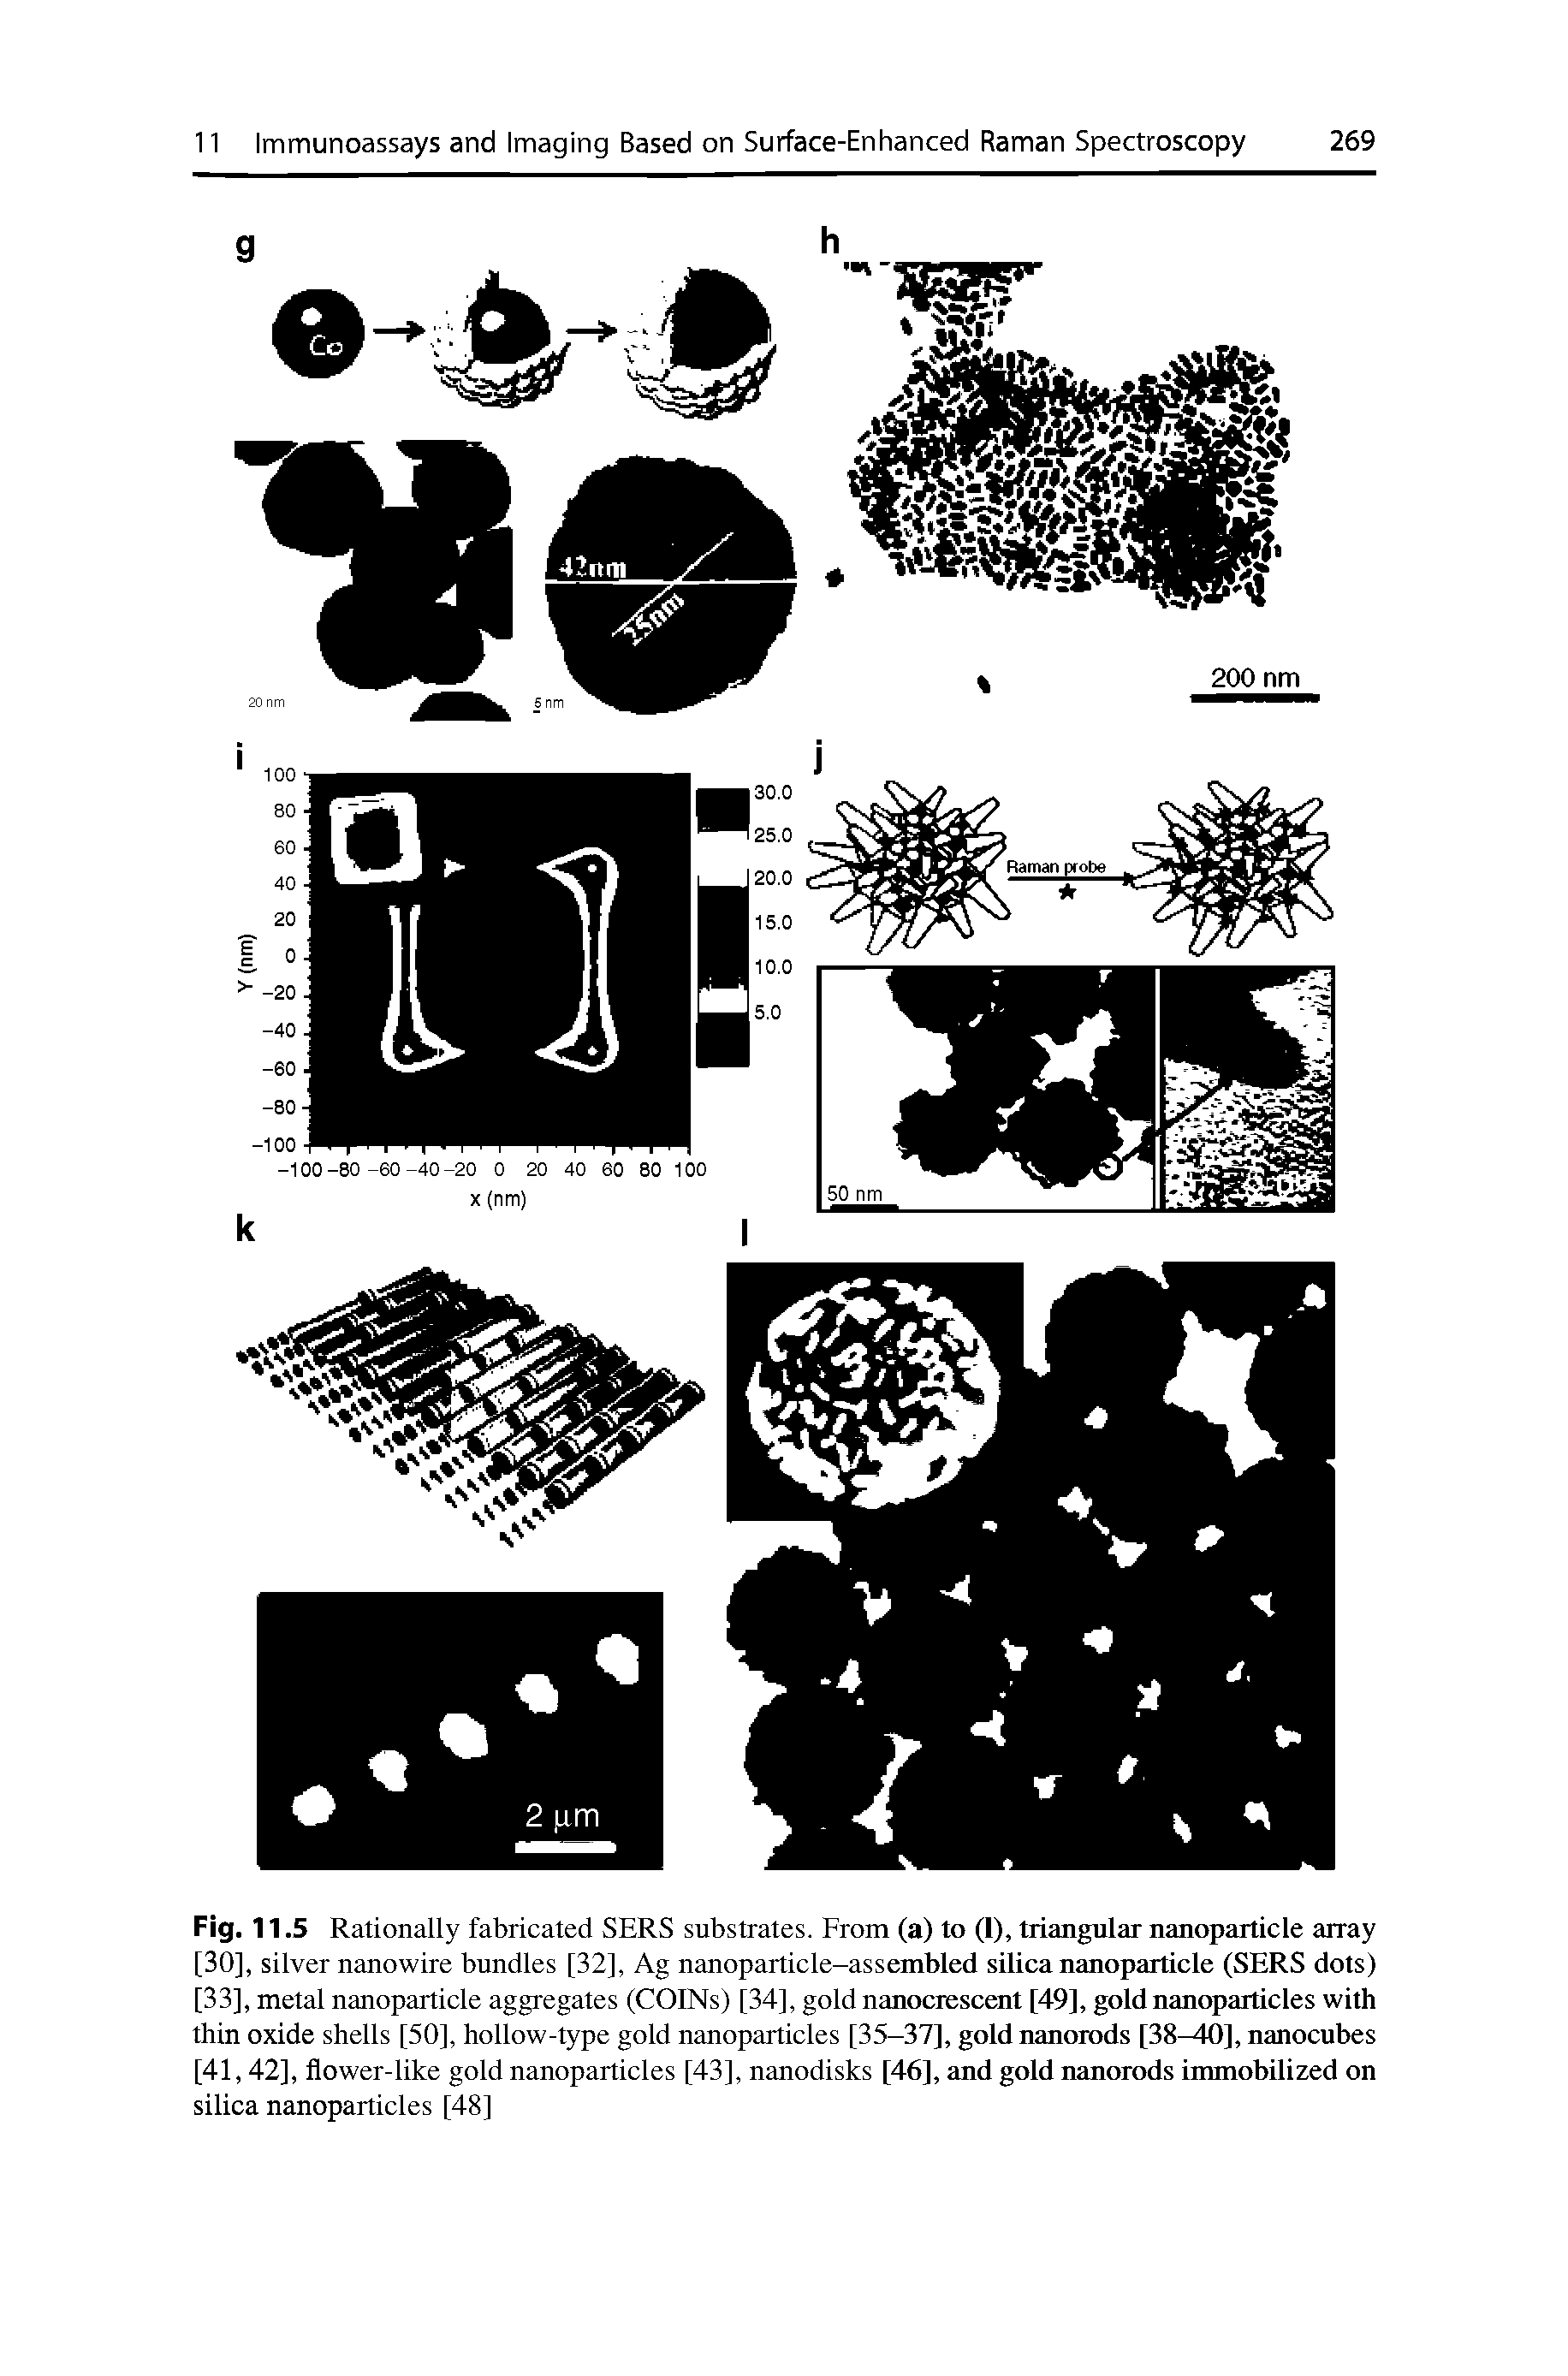 Fig. 11.5 Rationally fabricated SERS substrates. From (a) to (I), triangular nanoparticle array [30], silver nanowire bundles [32], Ag nanoparticle-assembled silica nanoparticle (SERS dots) [33], metal nanoparticle aggregates (COINs) [34], gold nanocrescent [49], gold nanoparticles with thin oxide shells [50], hollow-type gold nanoparticles [35-37], gold nanorods [38 10], nanocubes [41,42], flower-like gold nanoparticles [43], nanodisks [46], and gold nanorods immobilized on silica nanoparticles [48]...